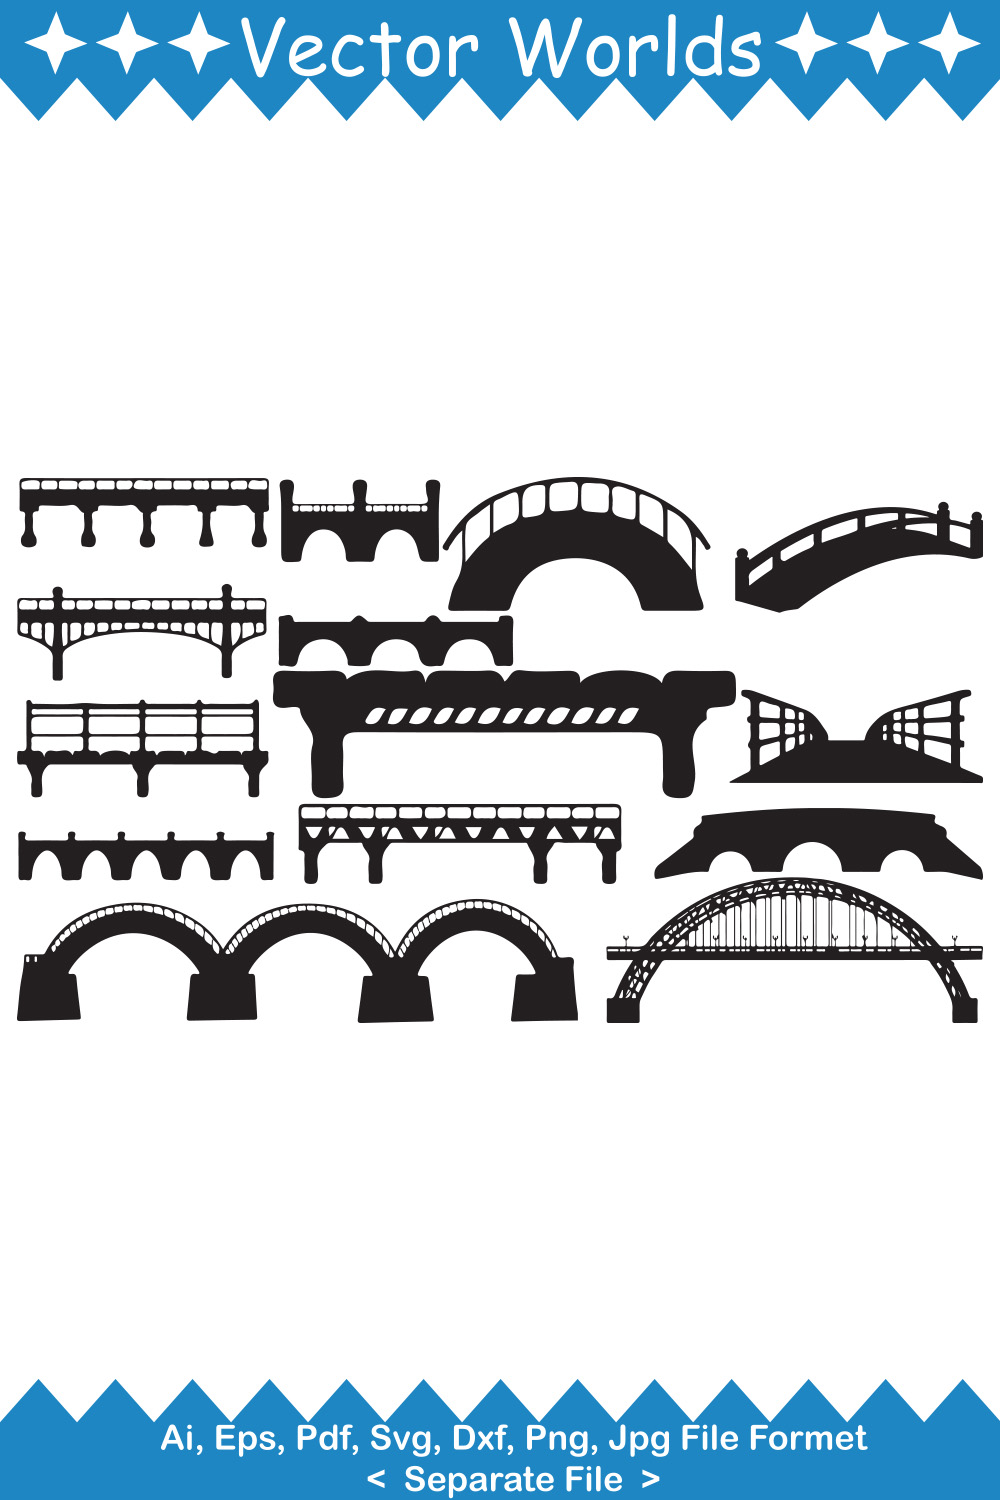 A selection of vector charming images of bridge silhouettes.